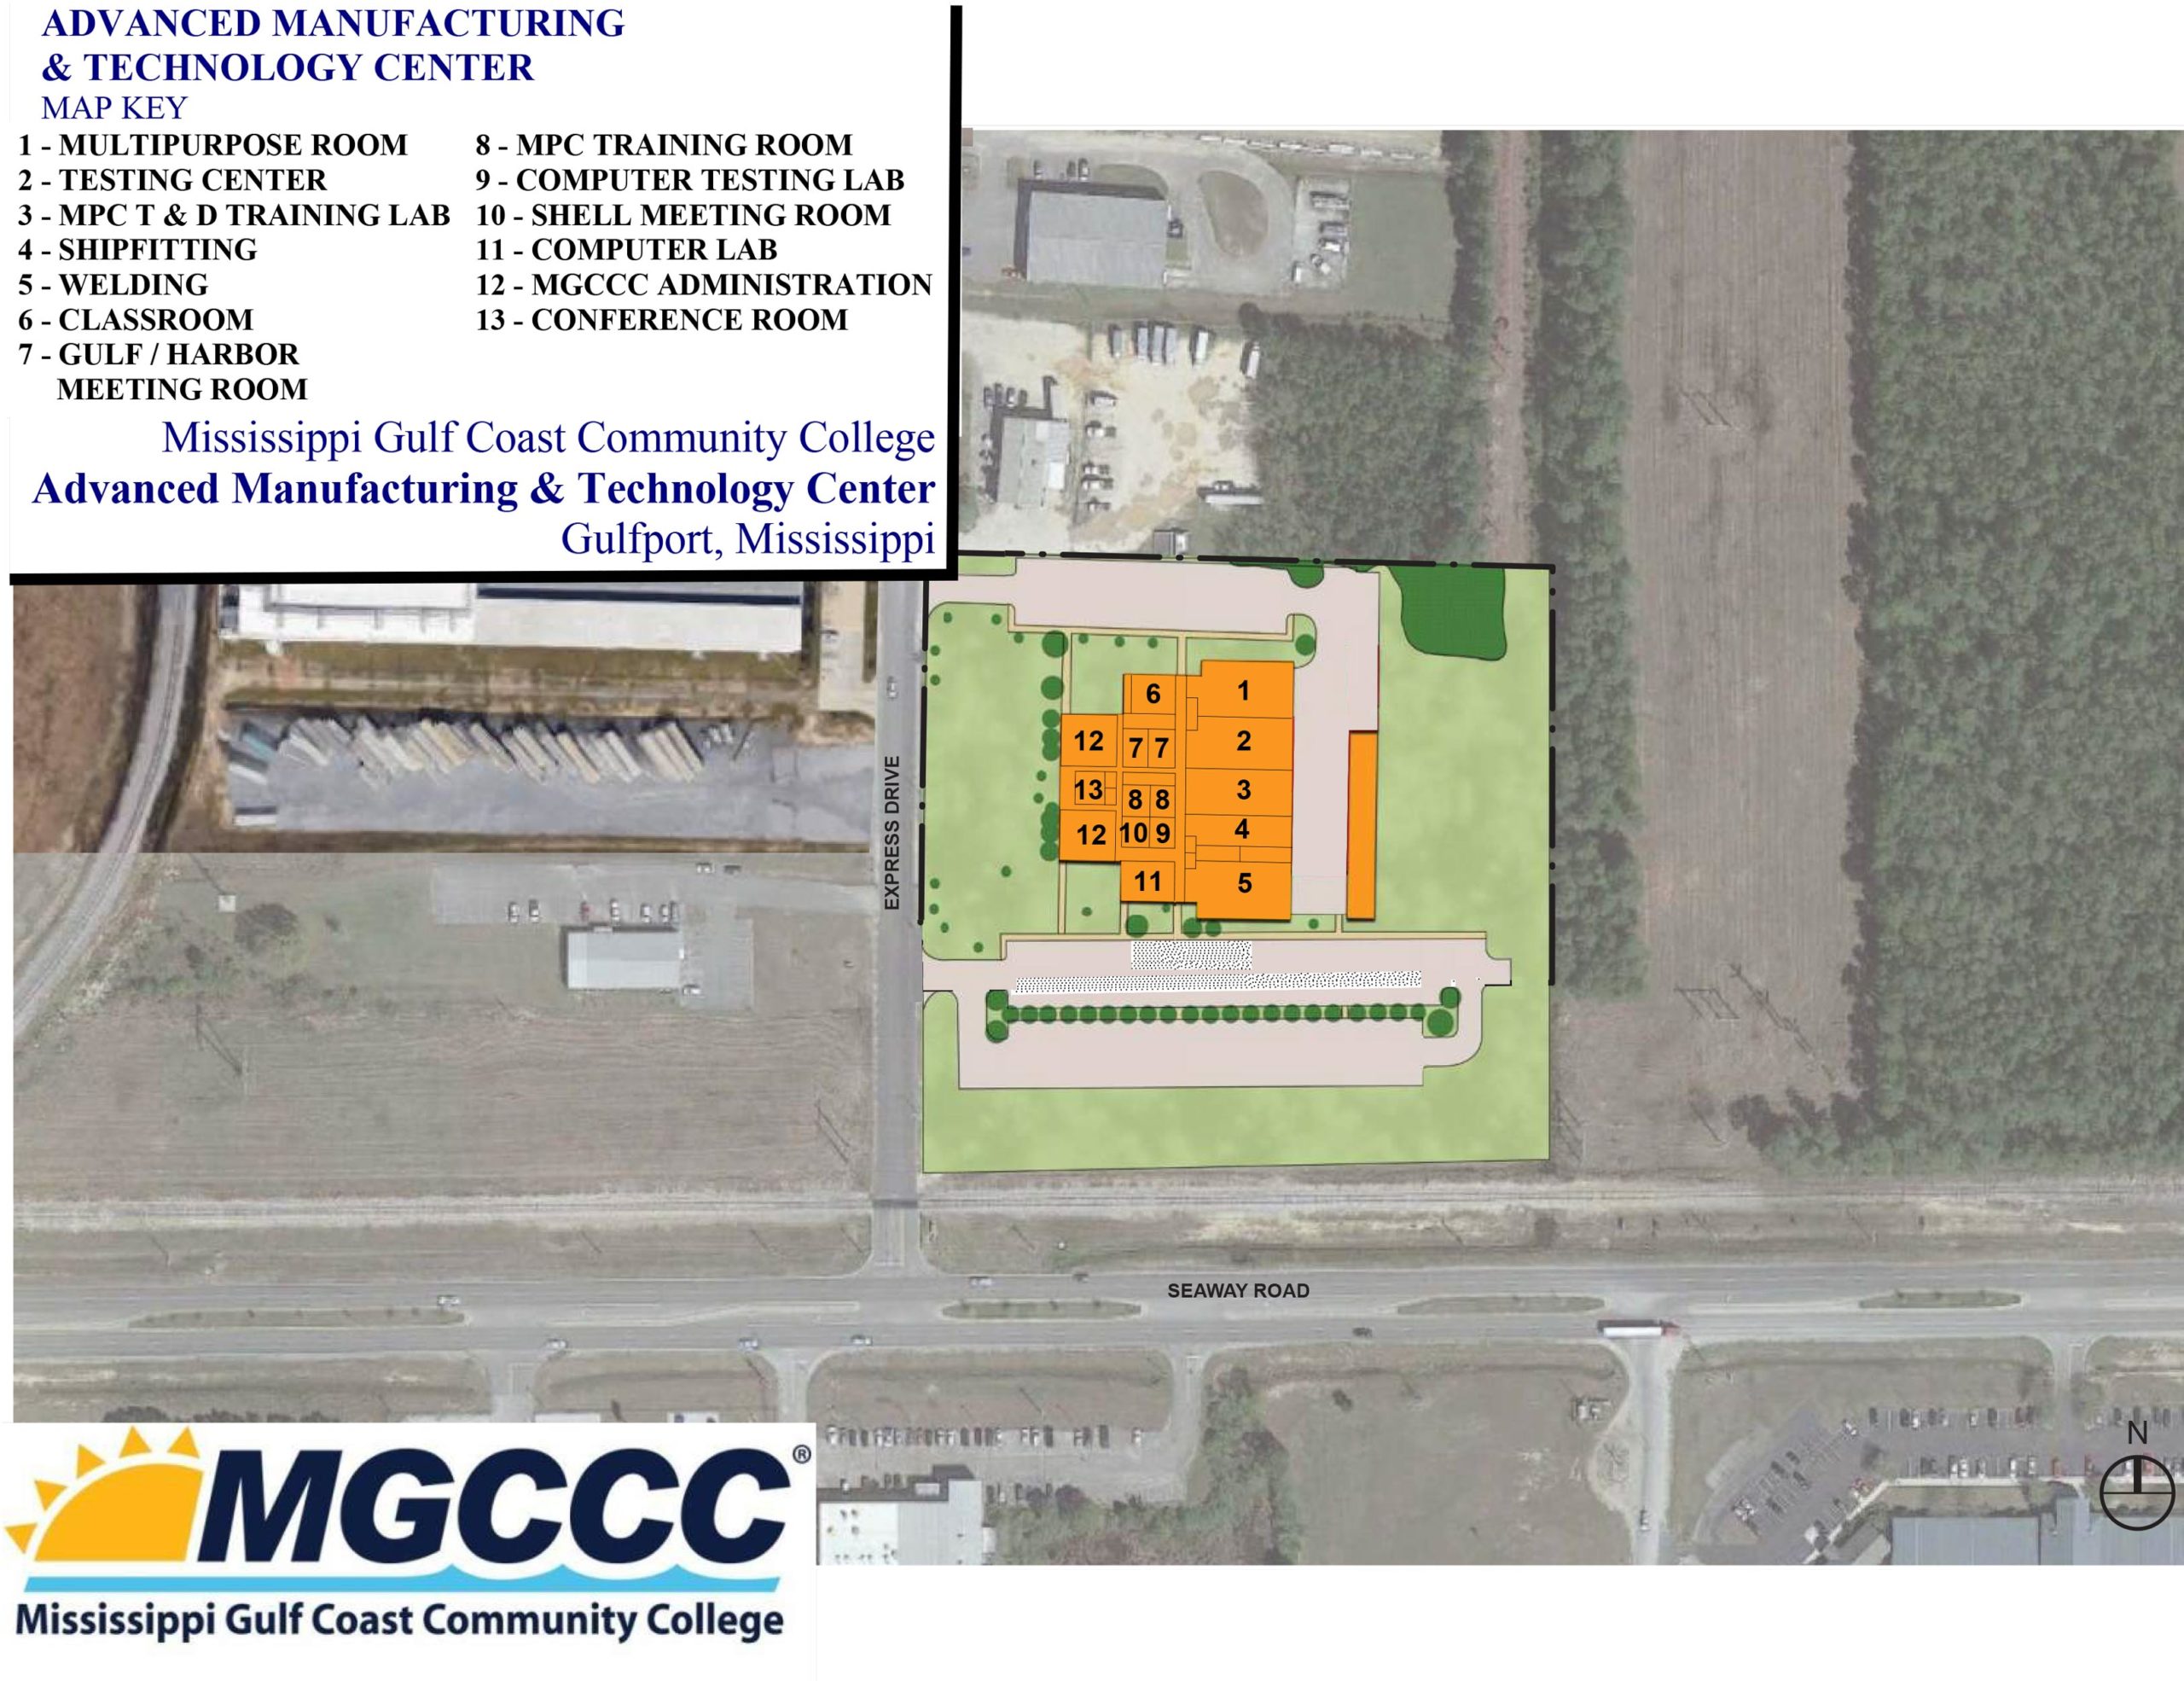 Map of Advanced Manufacturing and Technology Center at MGCCC.